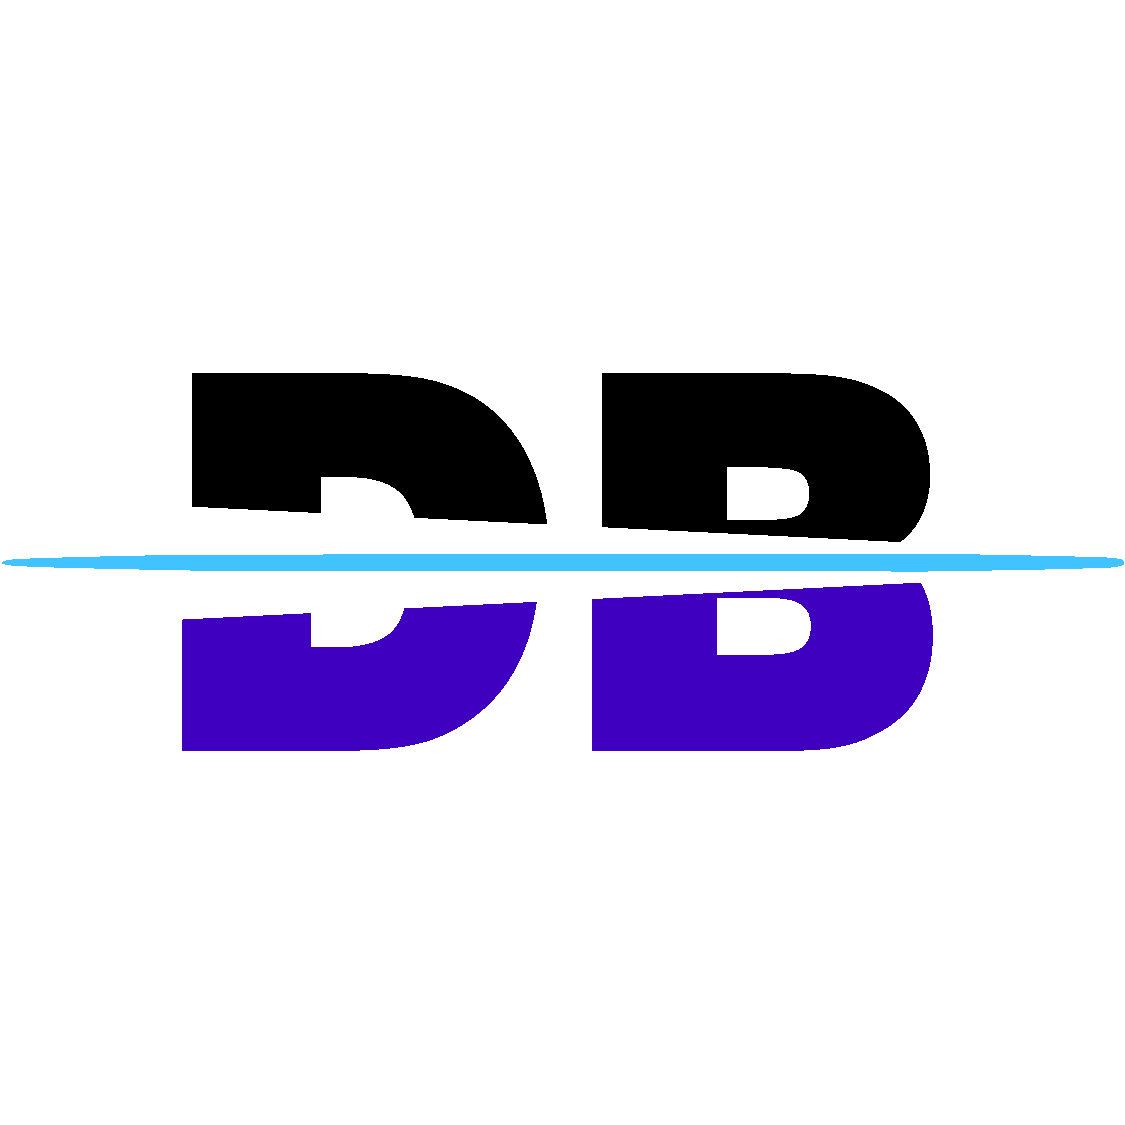 The second official DurchBurch logo.  It makes use of a simpler DB with a slash breaking up the center.